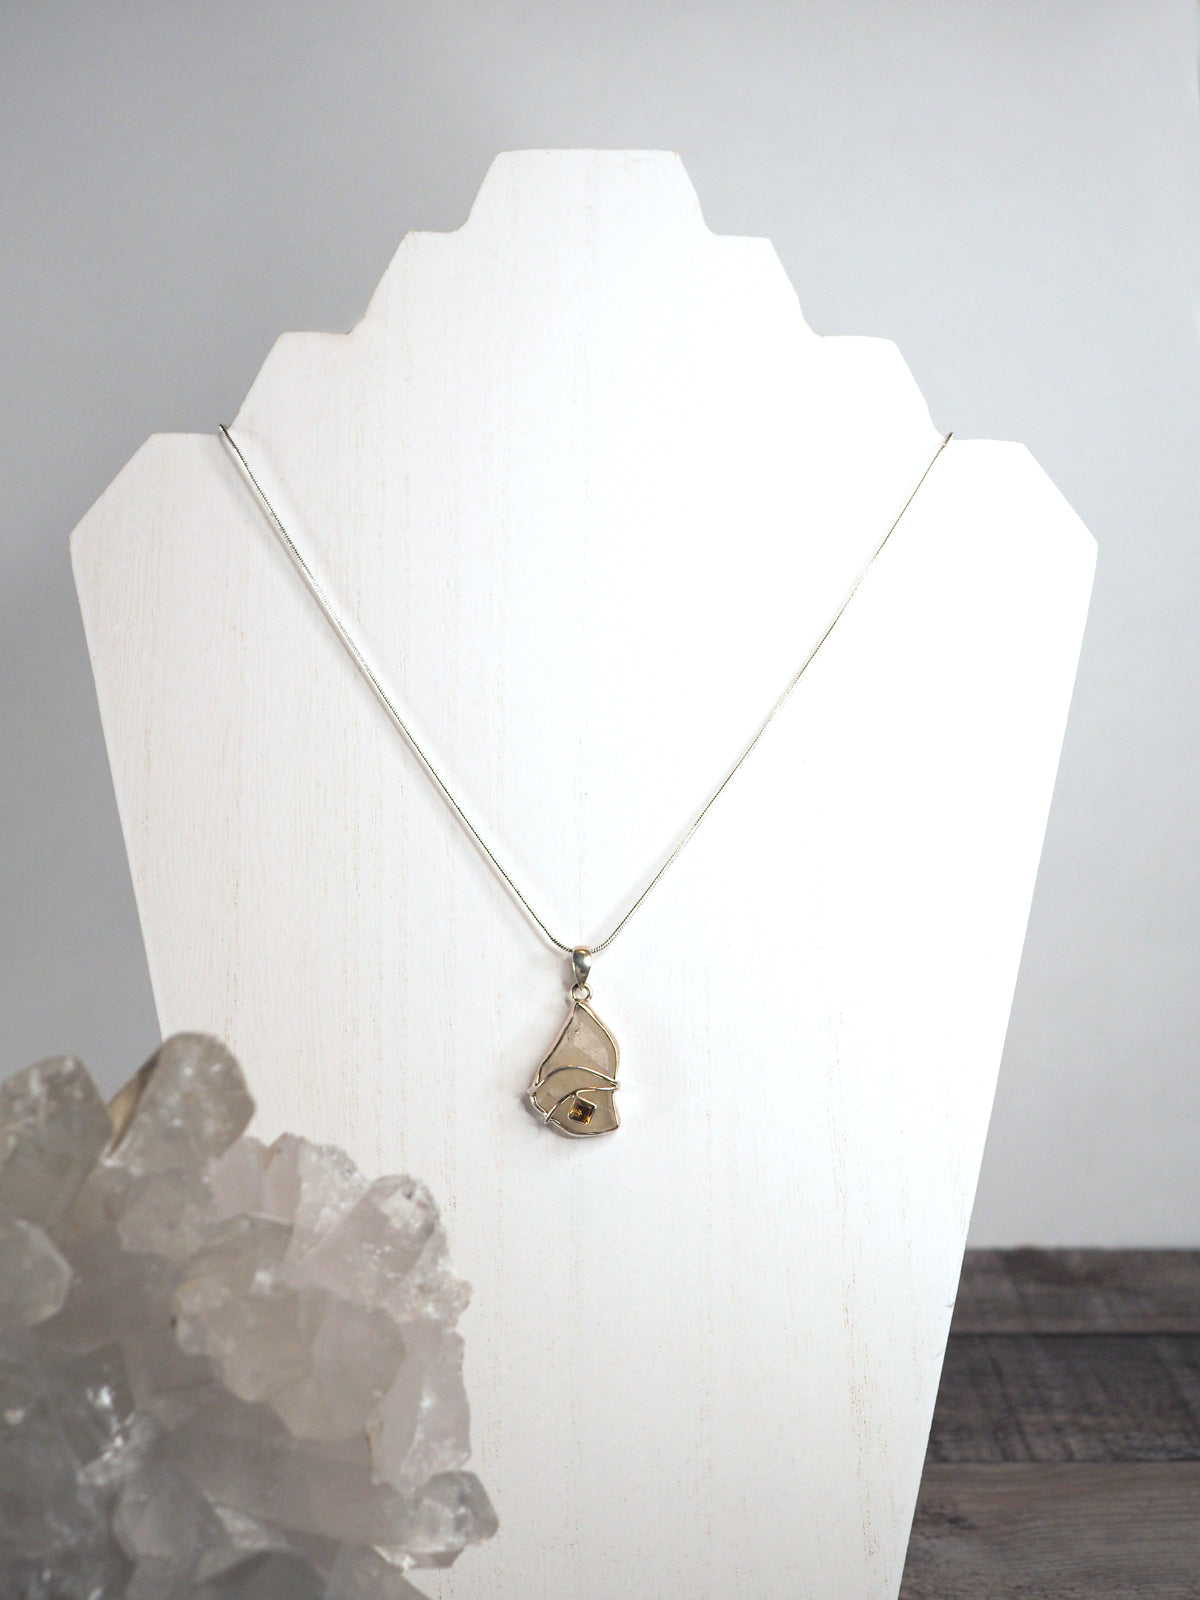 Libyan Desert Glass Pendant Necklace with Citrine in a Sterling Silver Setting Hanging on a Silver Chain